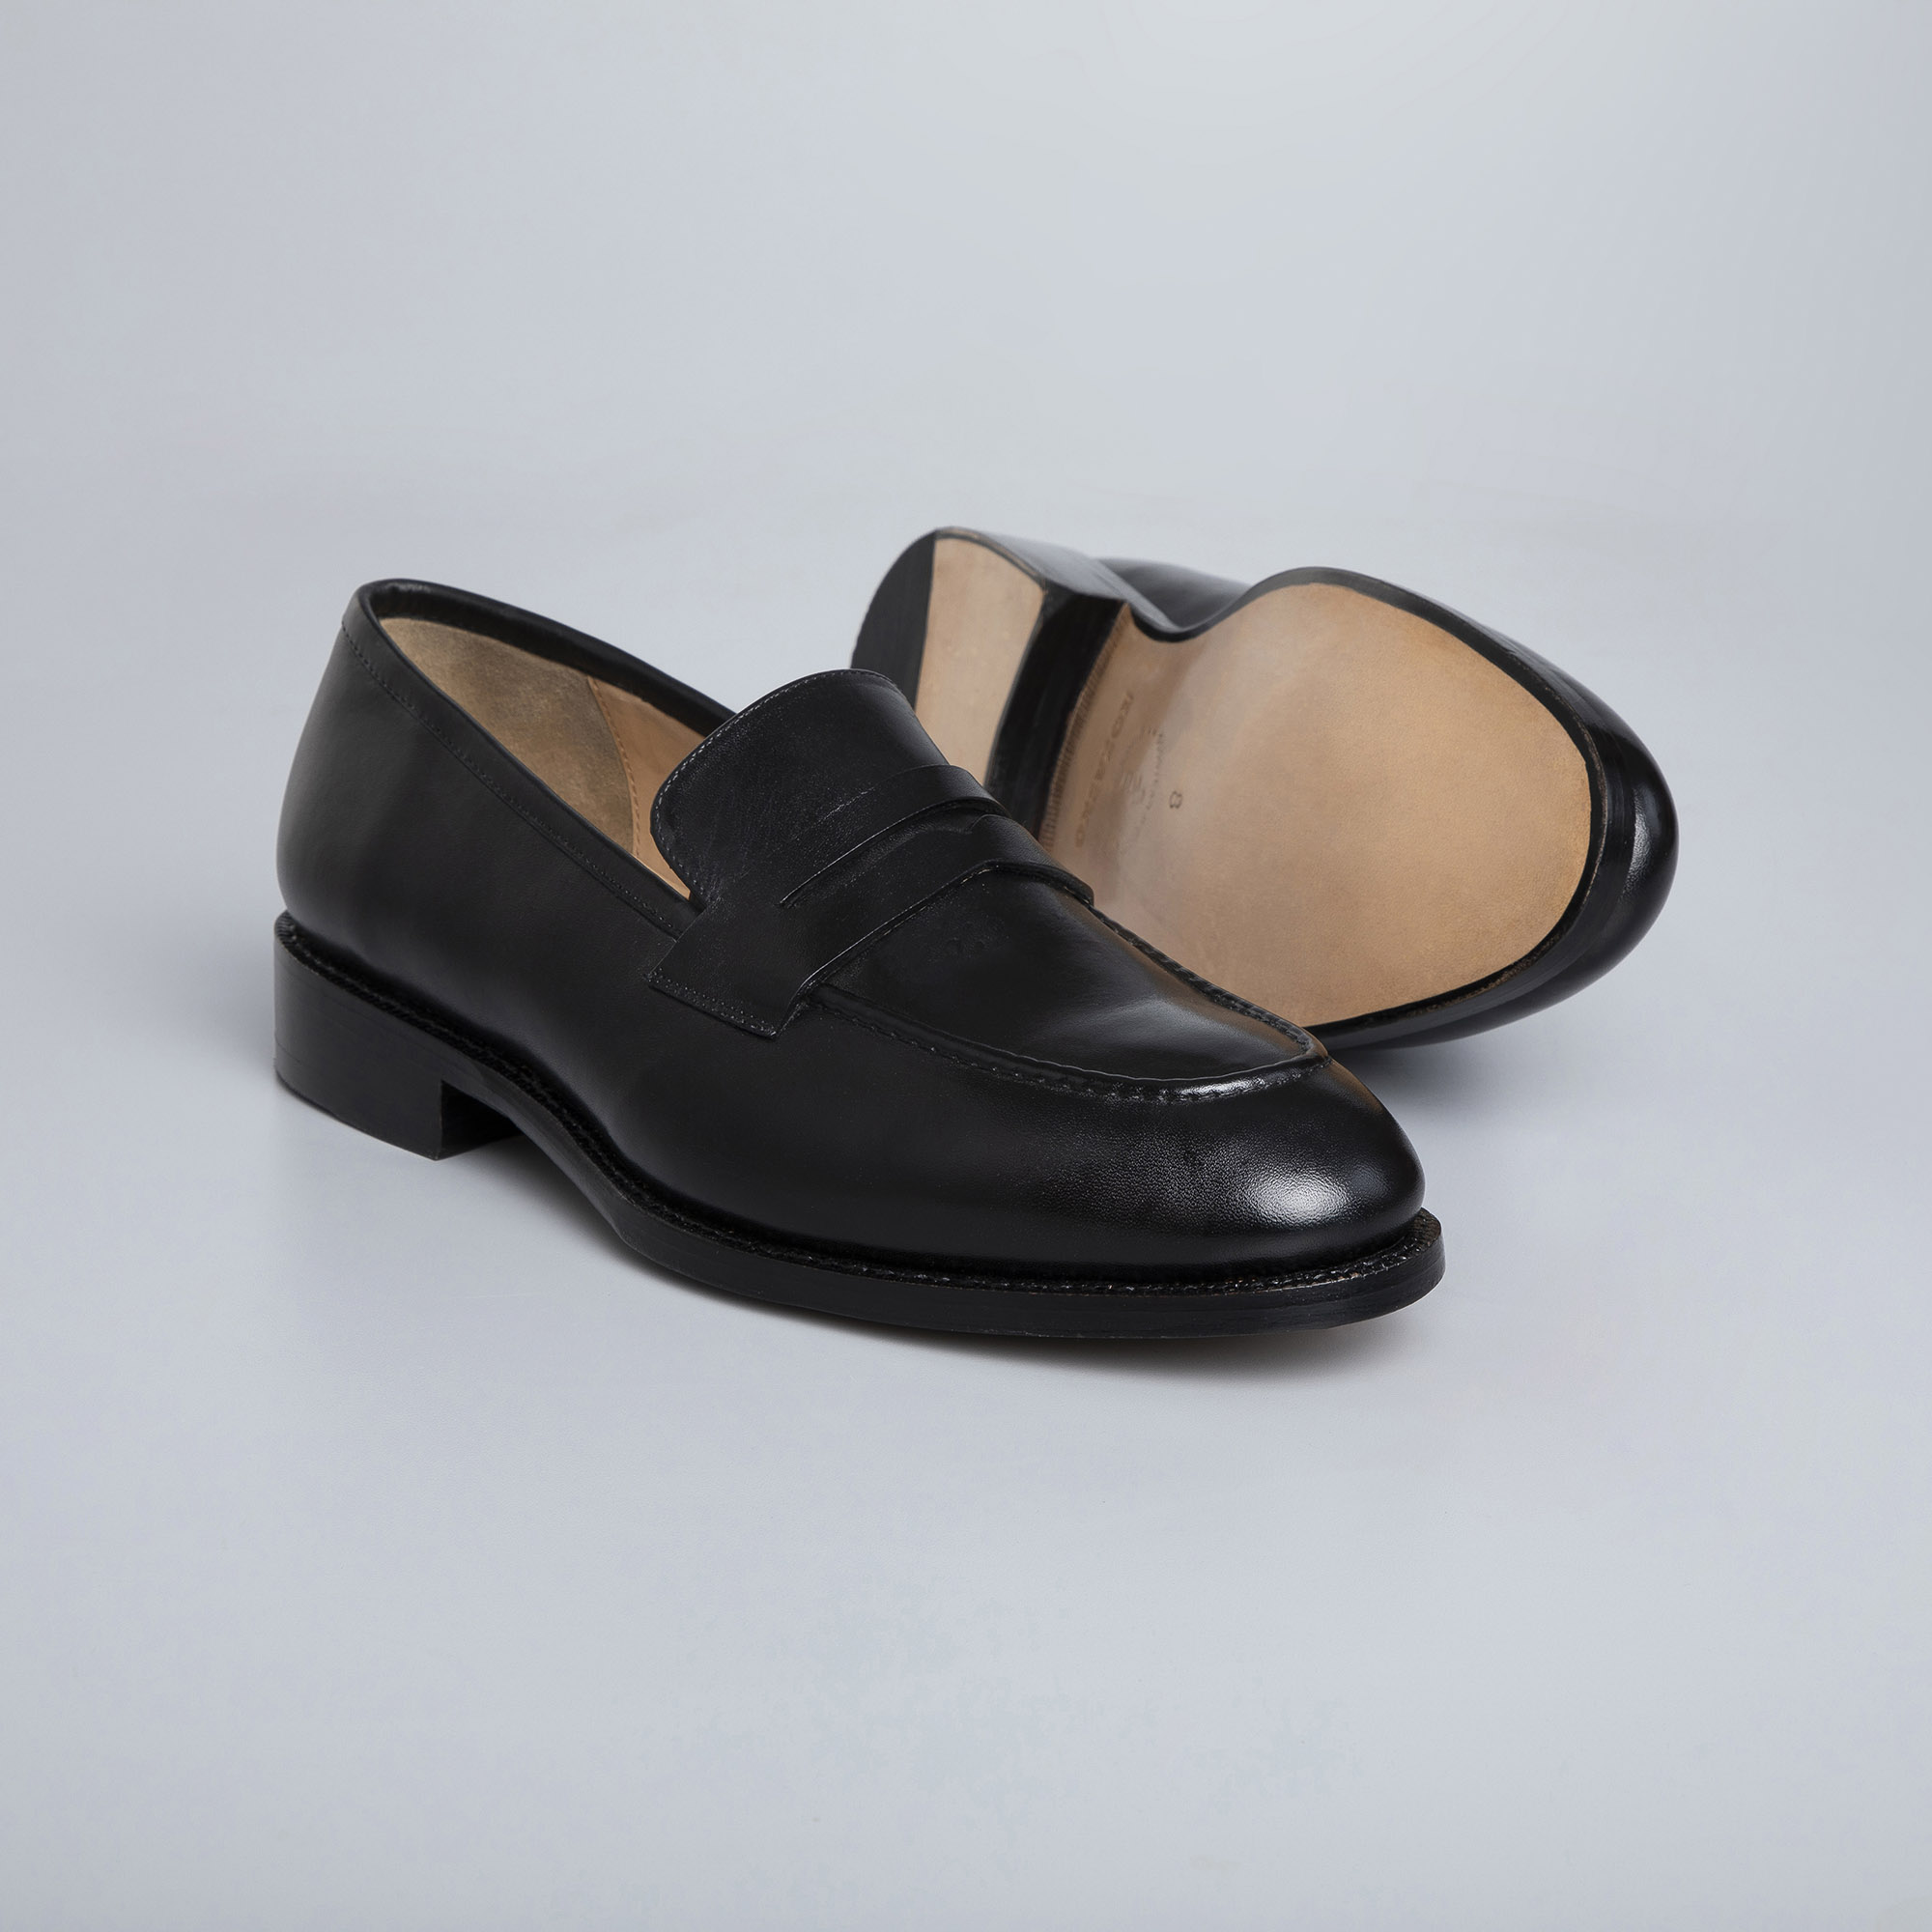 Goodyear Welted black penny loafer shoes for men